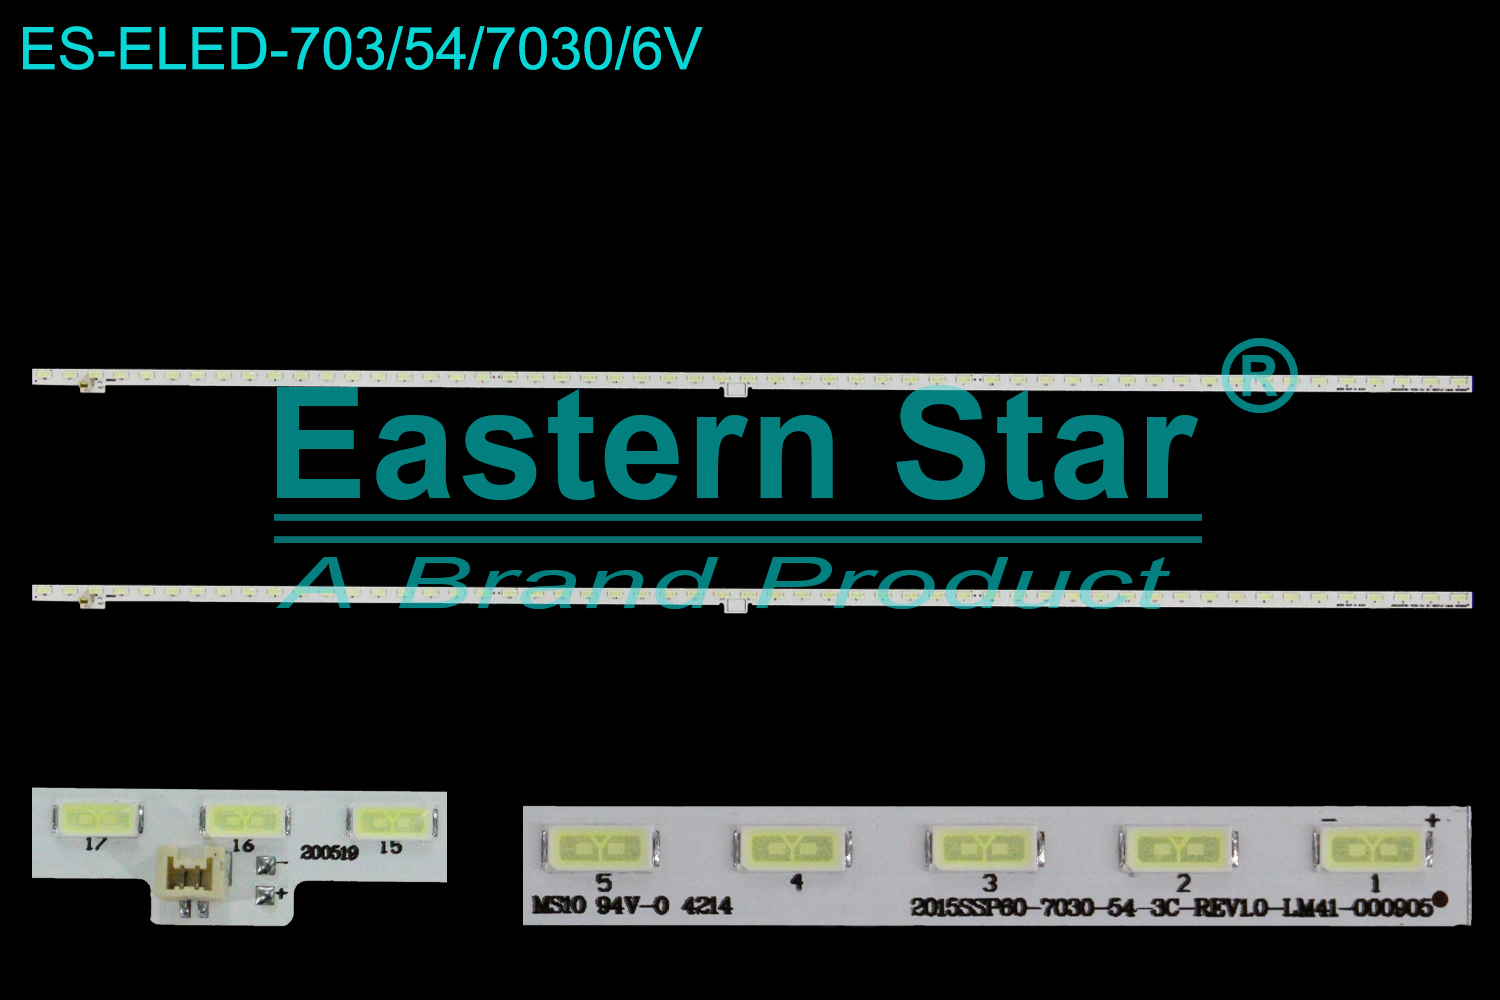 ES-ELED-703 ELED/EDGE TV backlight use for 60'' Sharp LC-60LE380X LC-60LE275X 2015SSP60-7030-54-3C-REV1.0-LM41-000905 LED STRIPS(2)